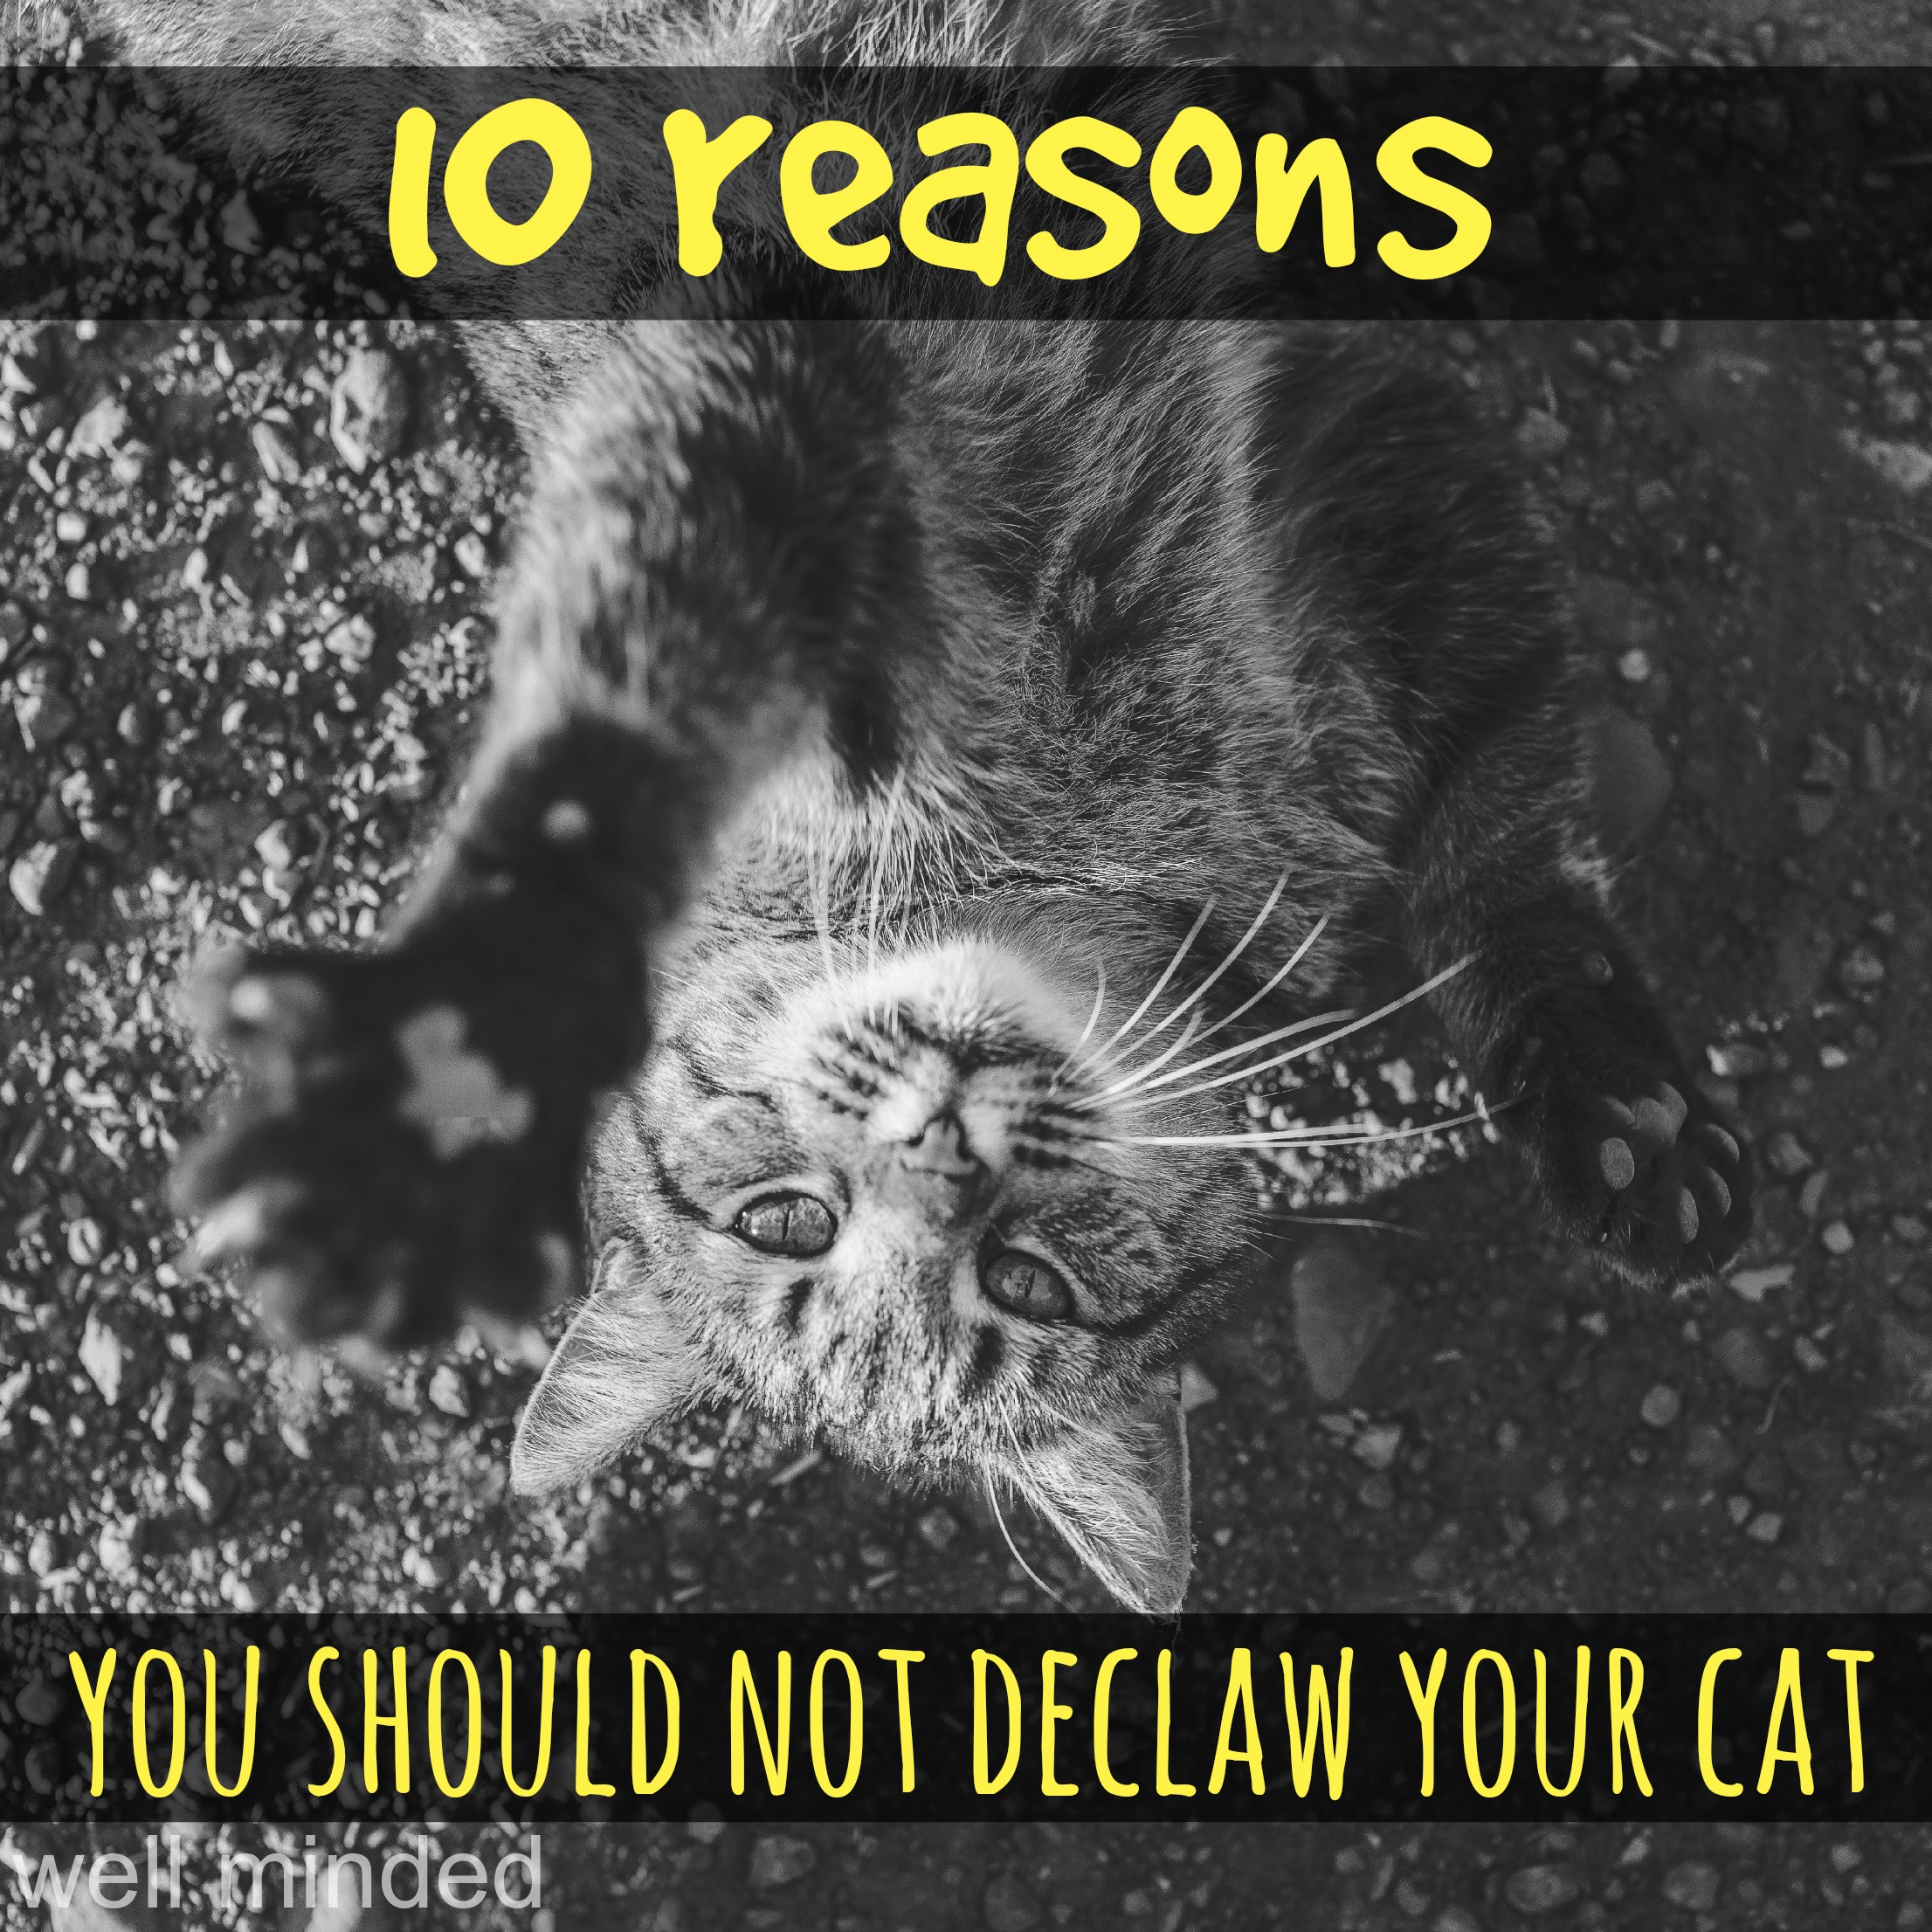 What Happens When You Declaw A Cat